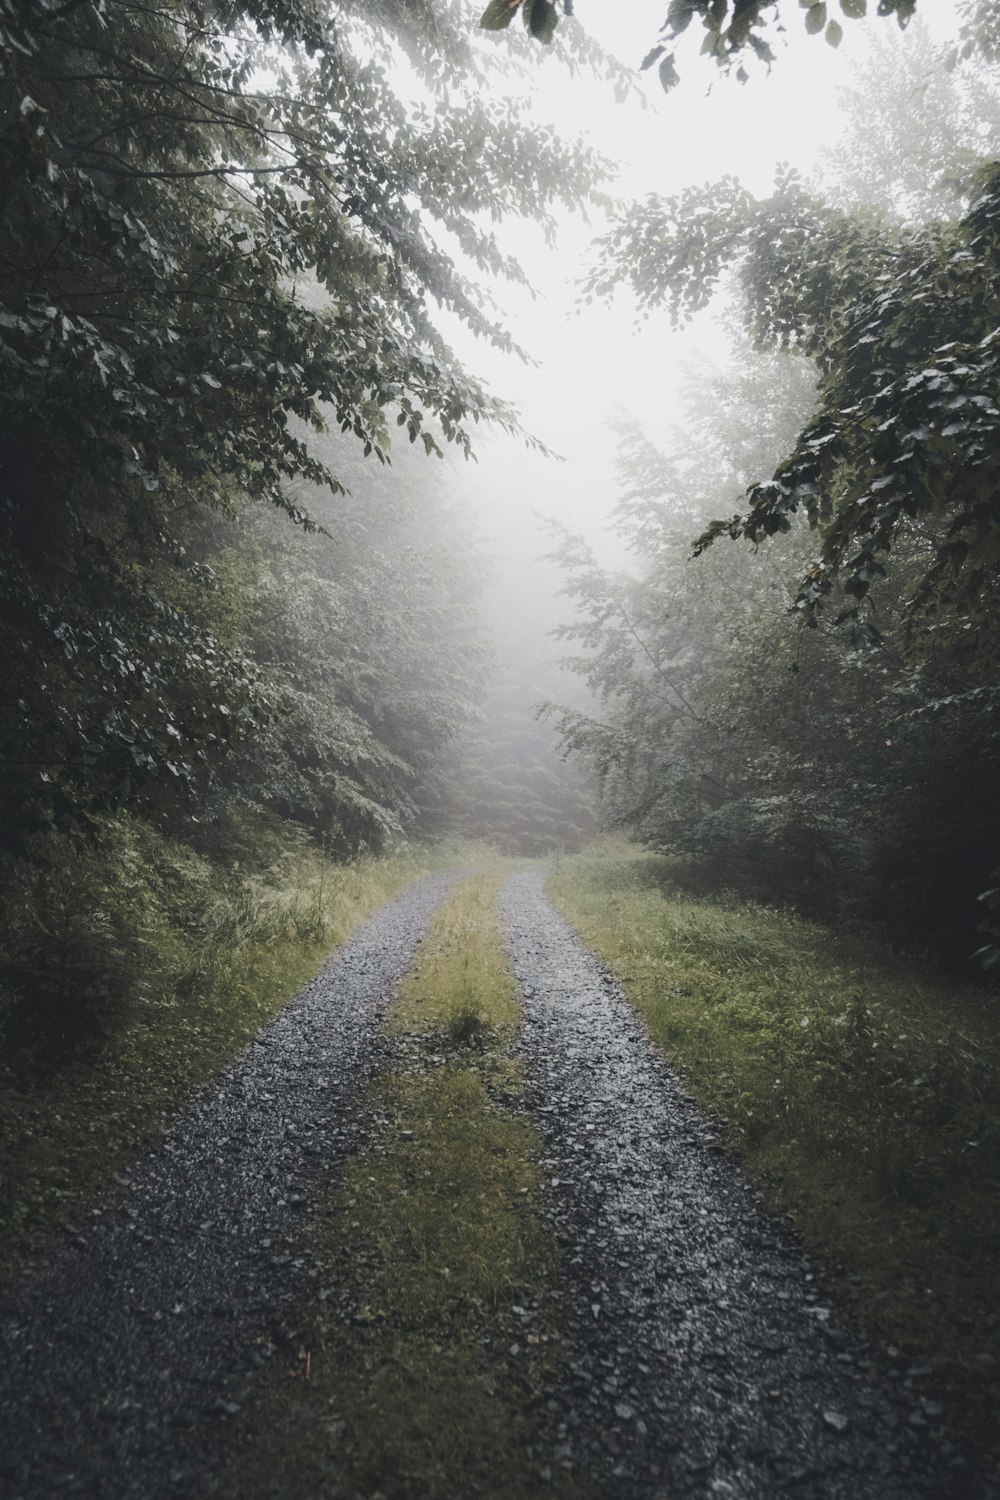 gravel road in between forest during foggy day